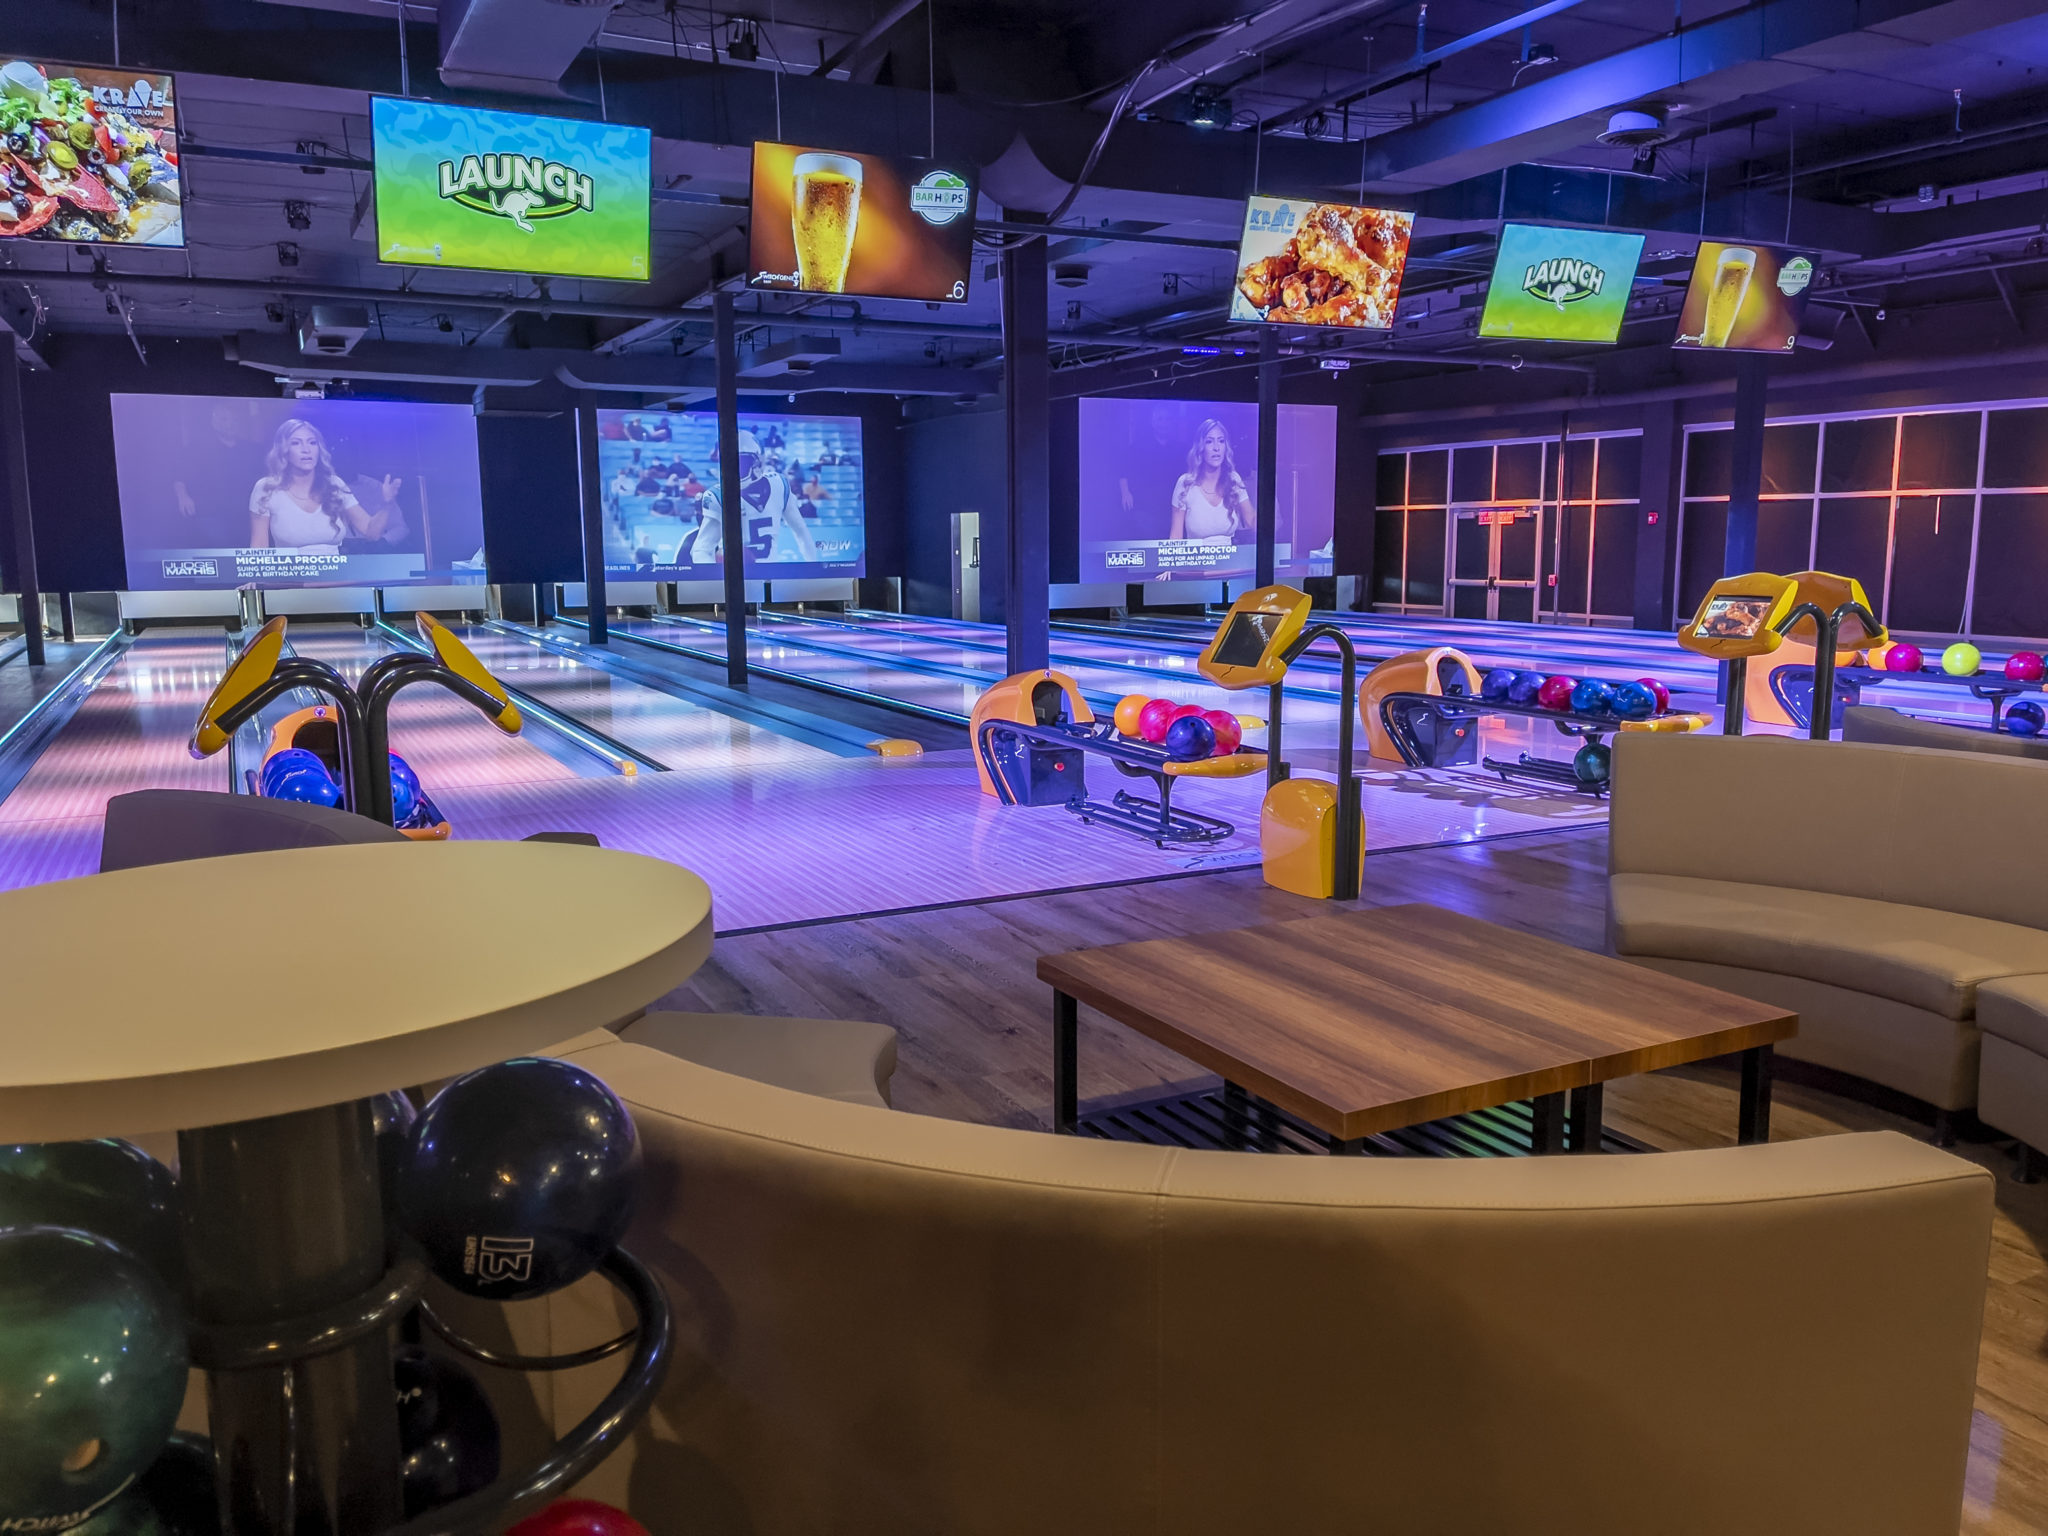 Is Owning a Bowling Alley Franchise Profitable in 2022?